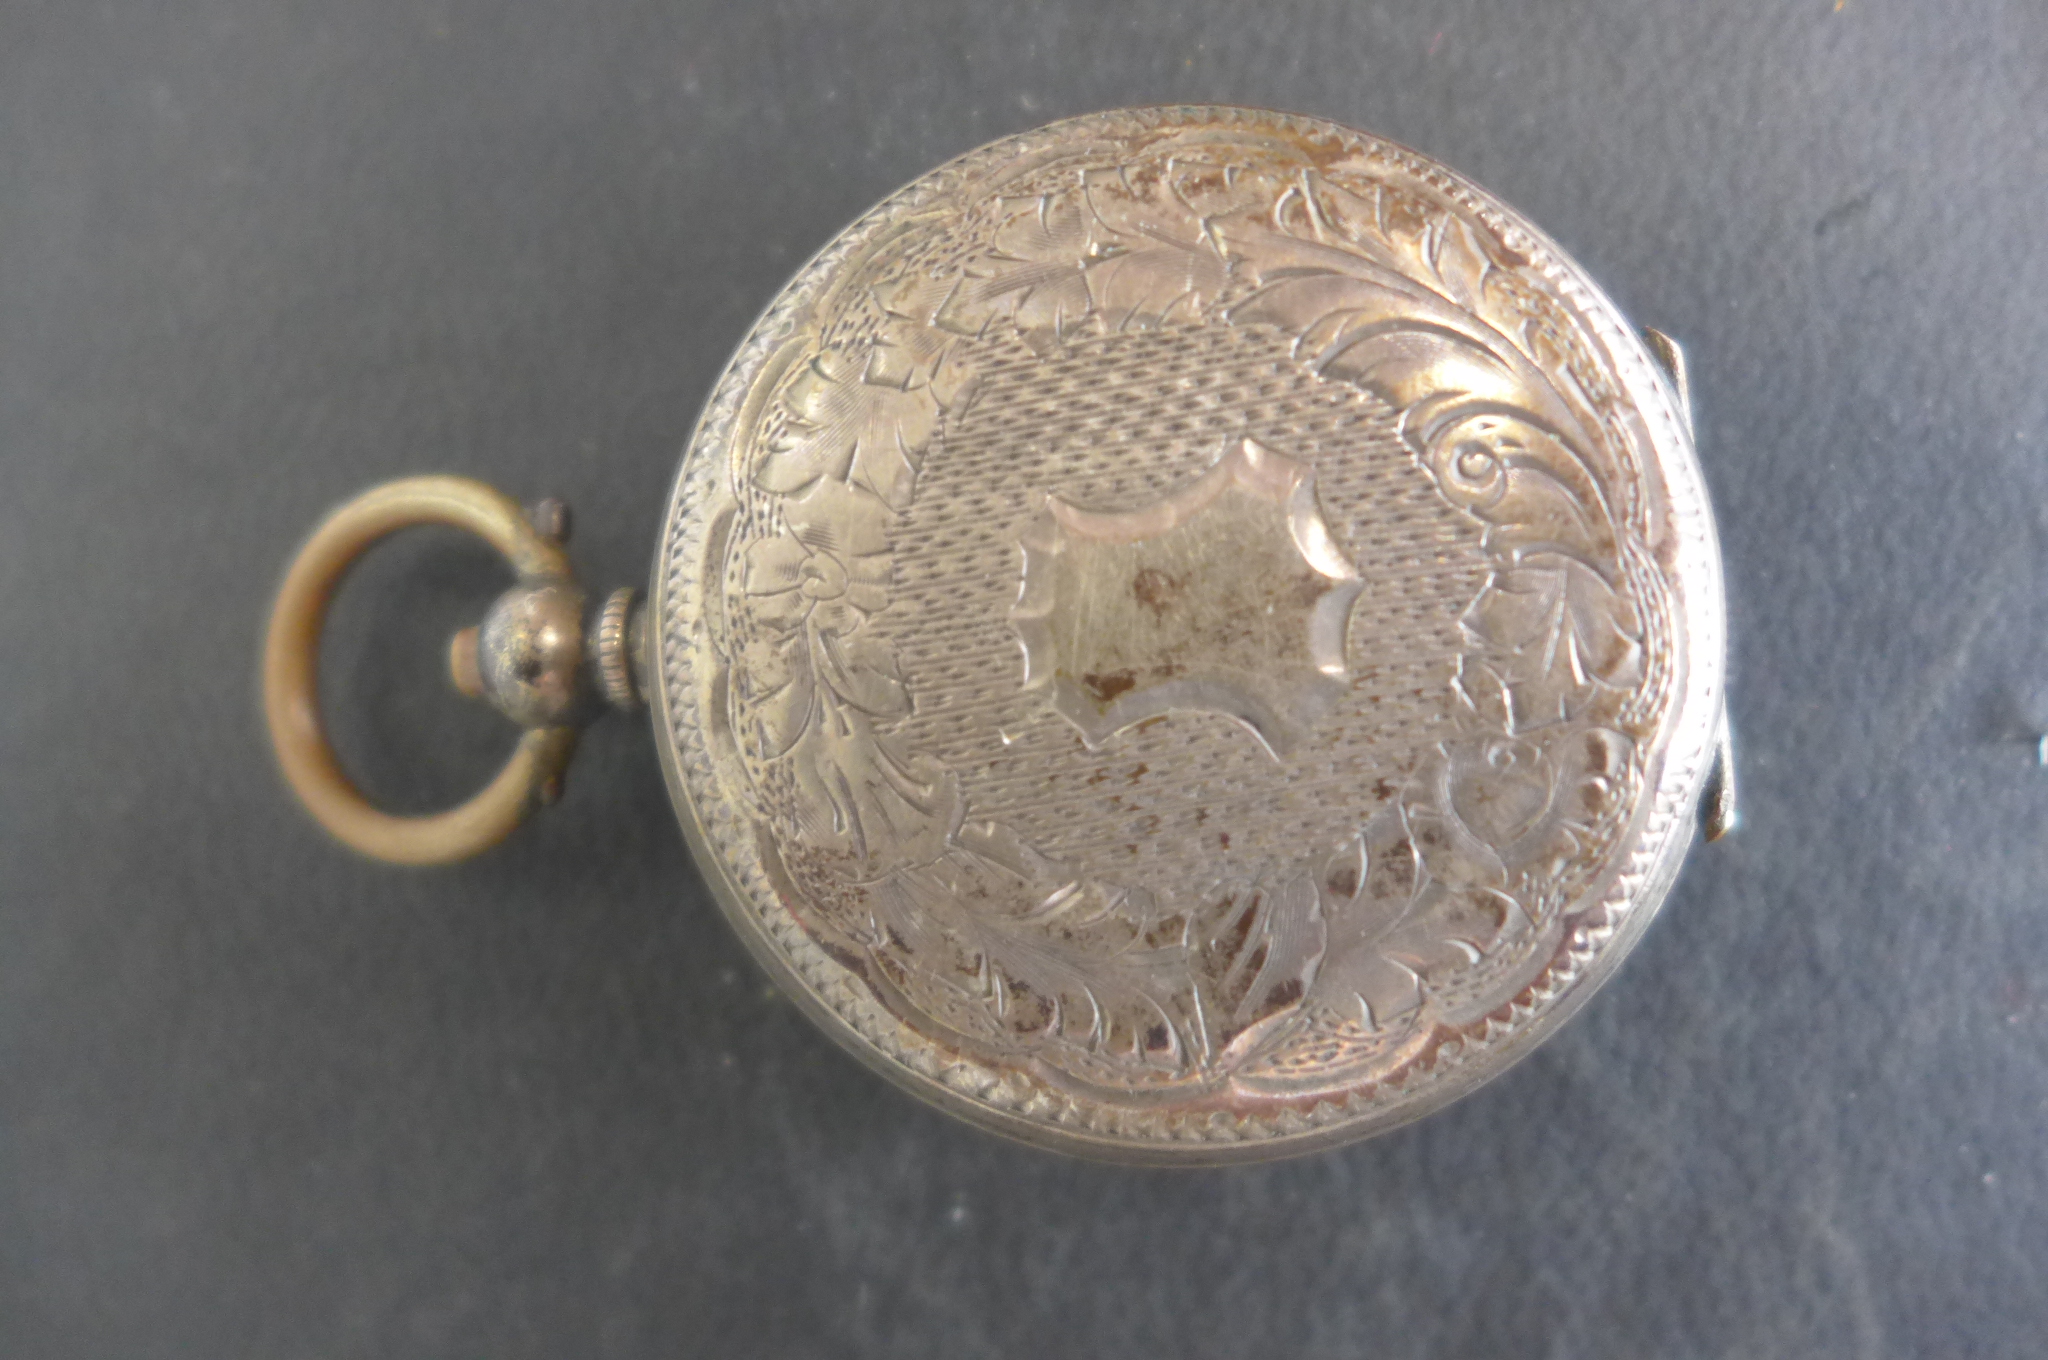 A gents silver half hunter and a ladies 800 silver fob watch, neither watch running, also a ladies - Image 3 of 5